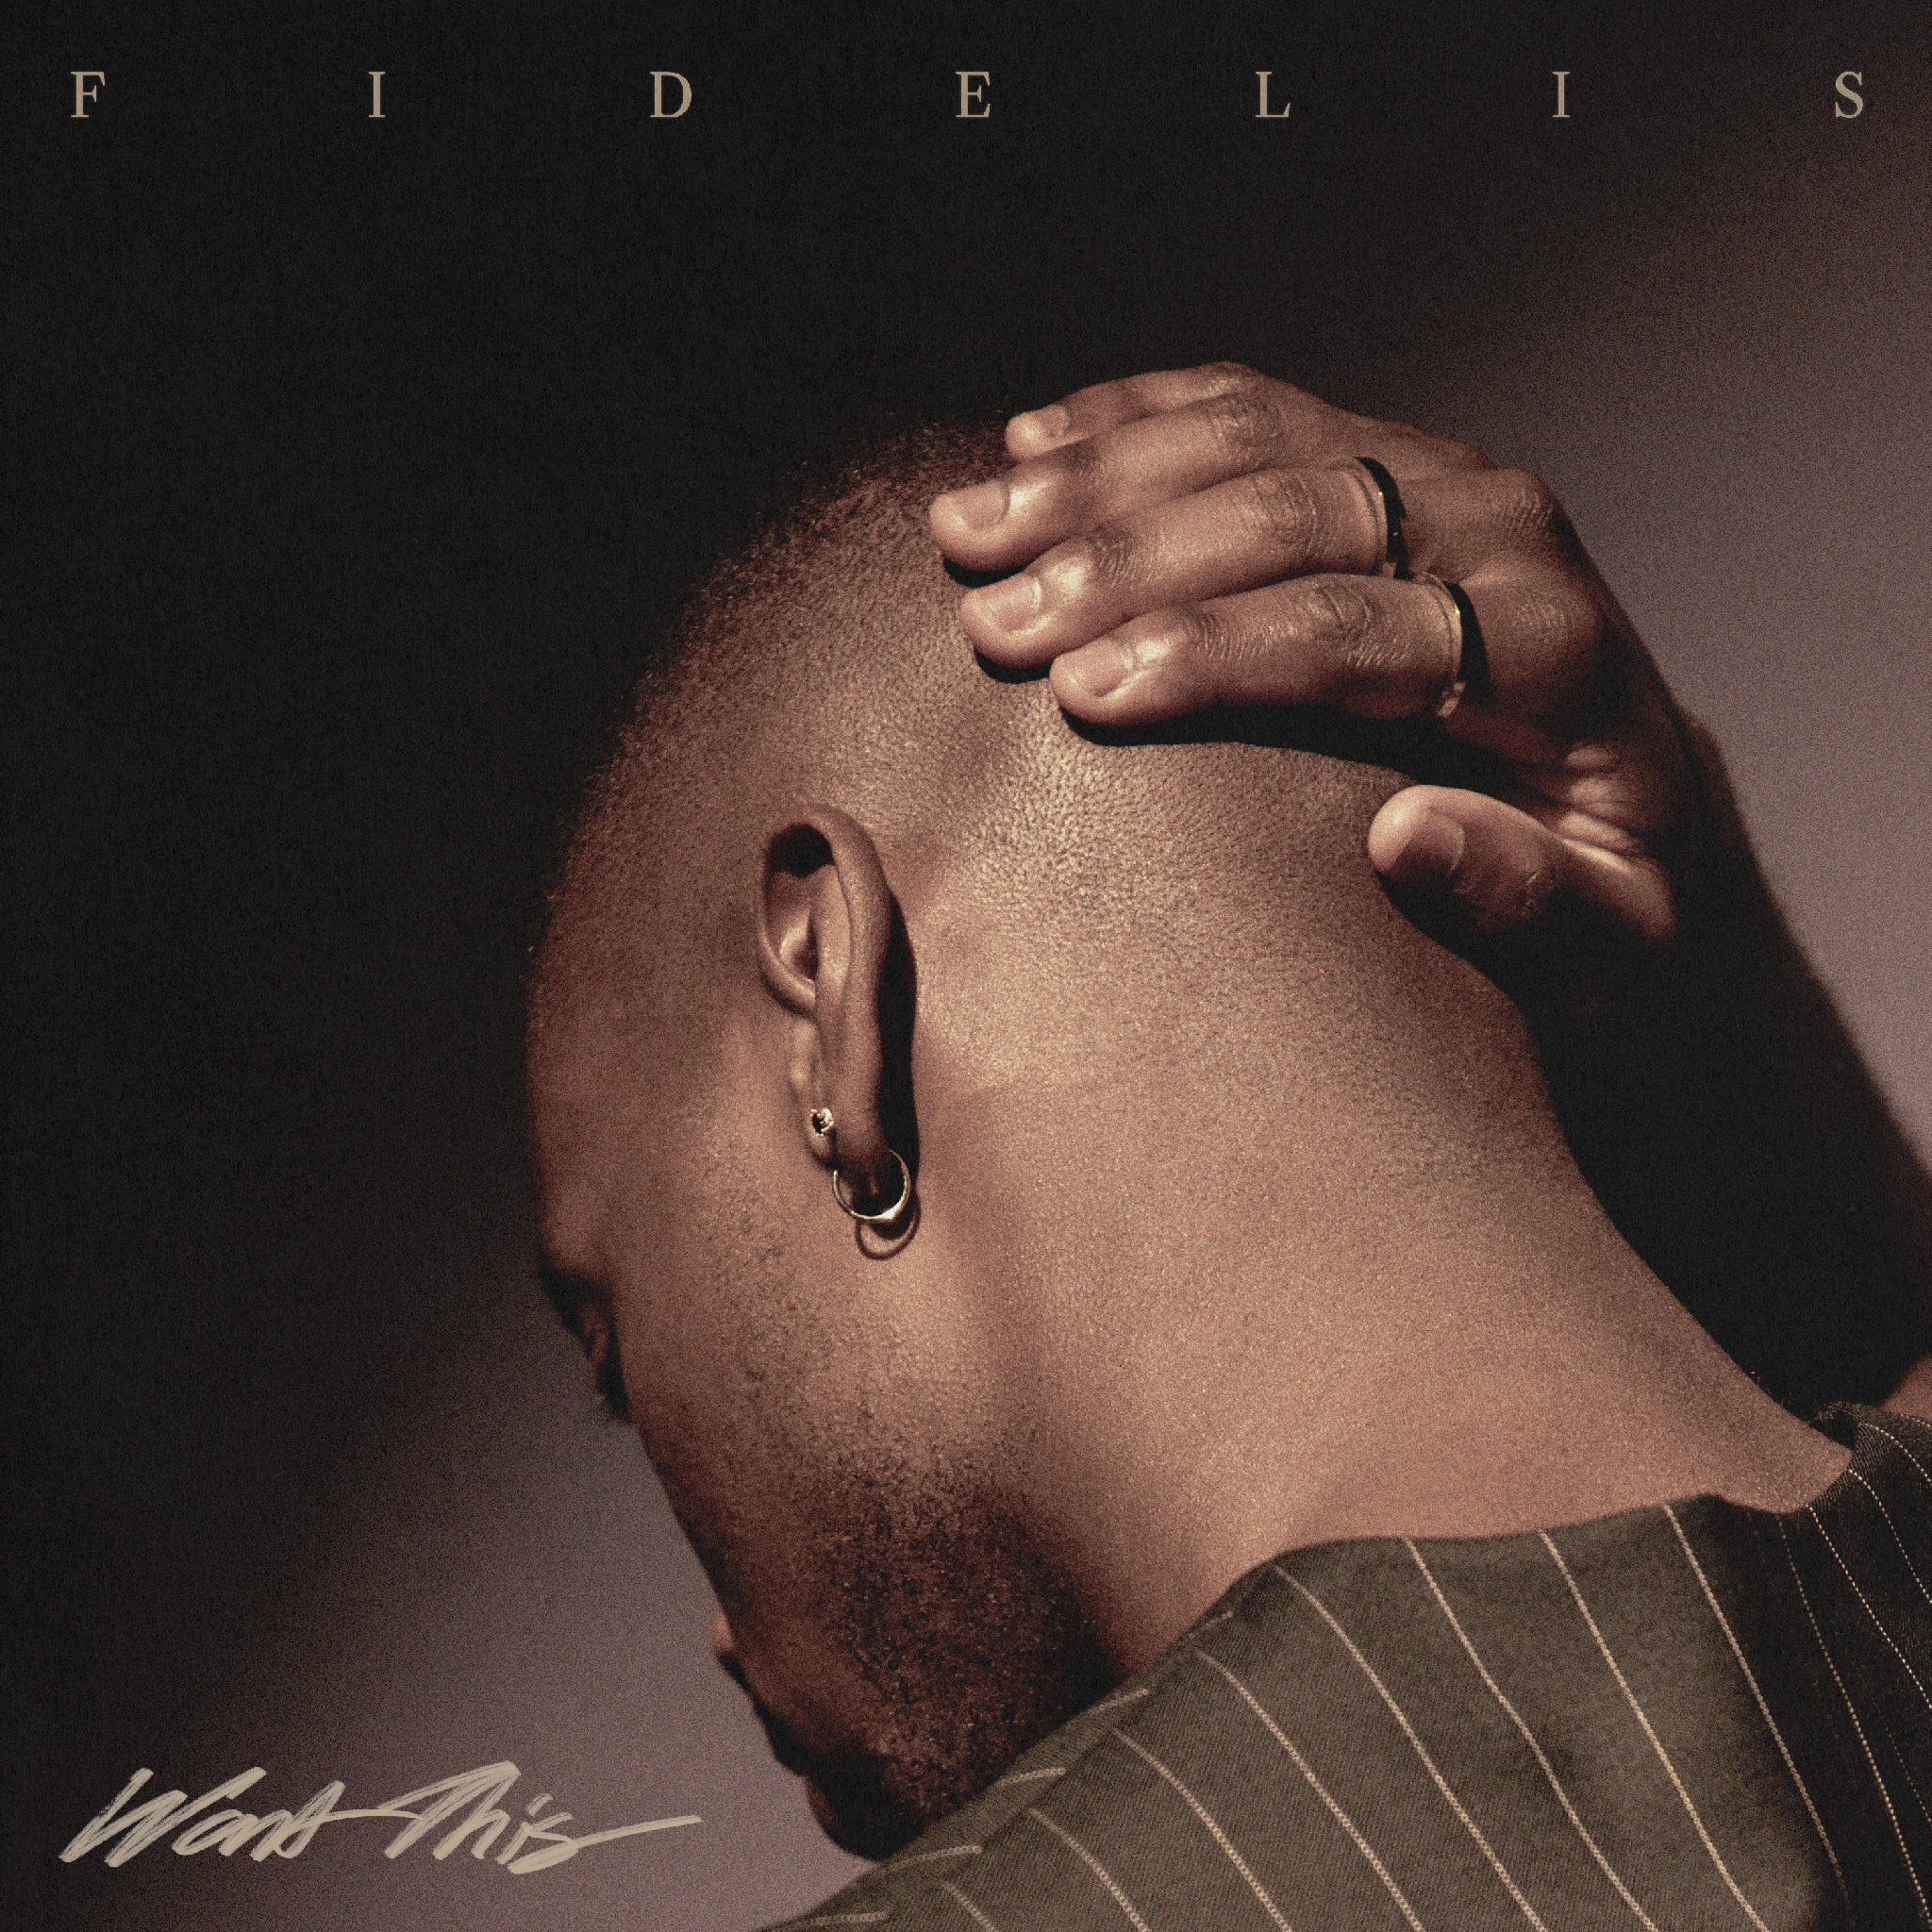 Fidelis- Want This (Track Review)